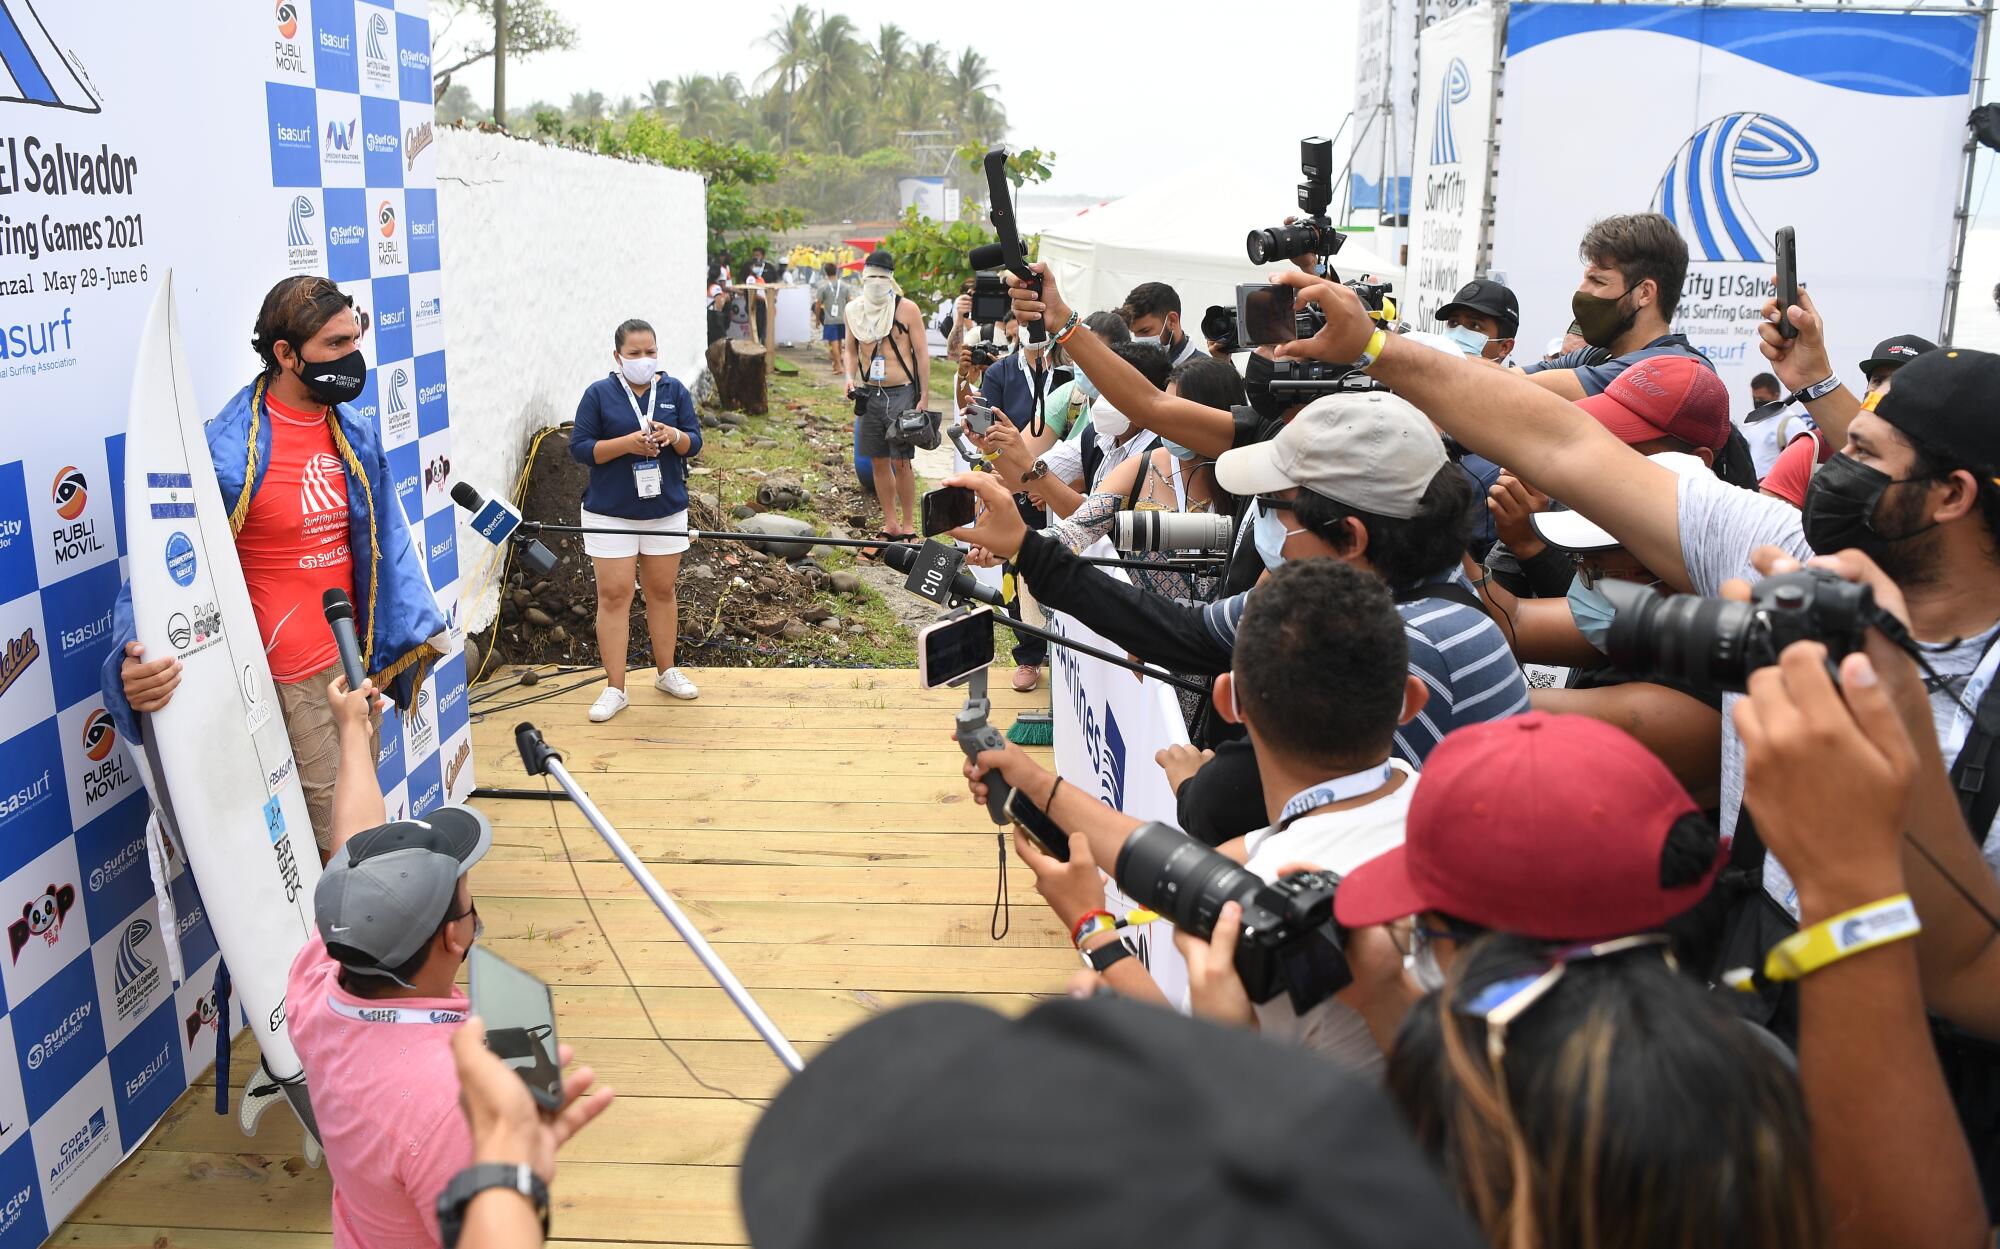 Bryan Perez answers questions from the media at the ISA World Surfing Games in El Salvador. 